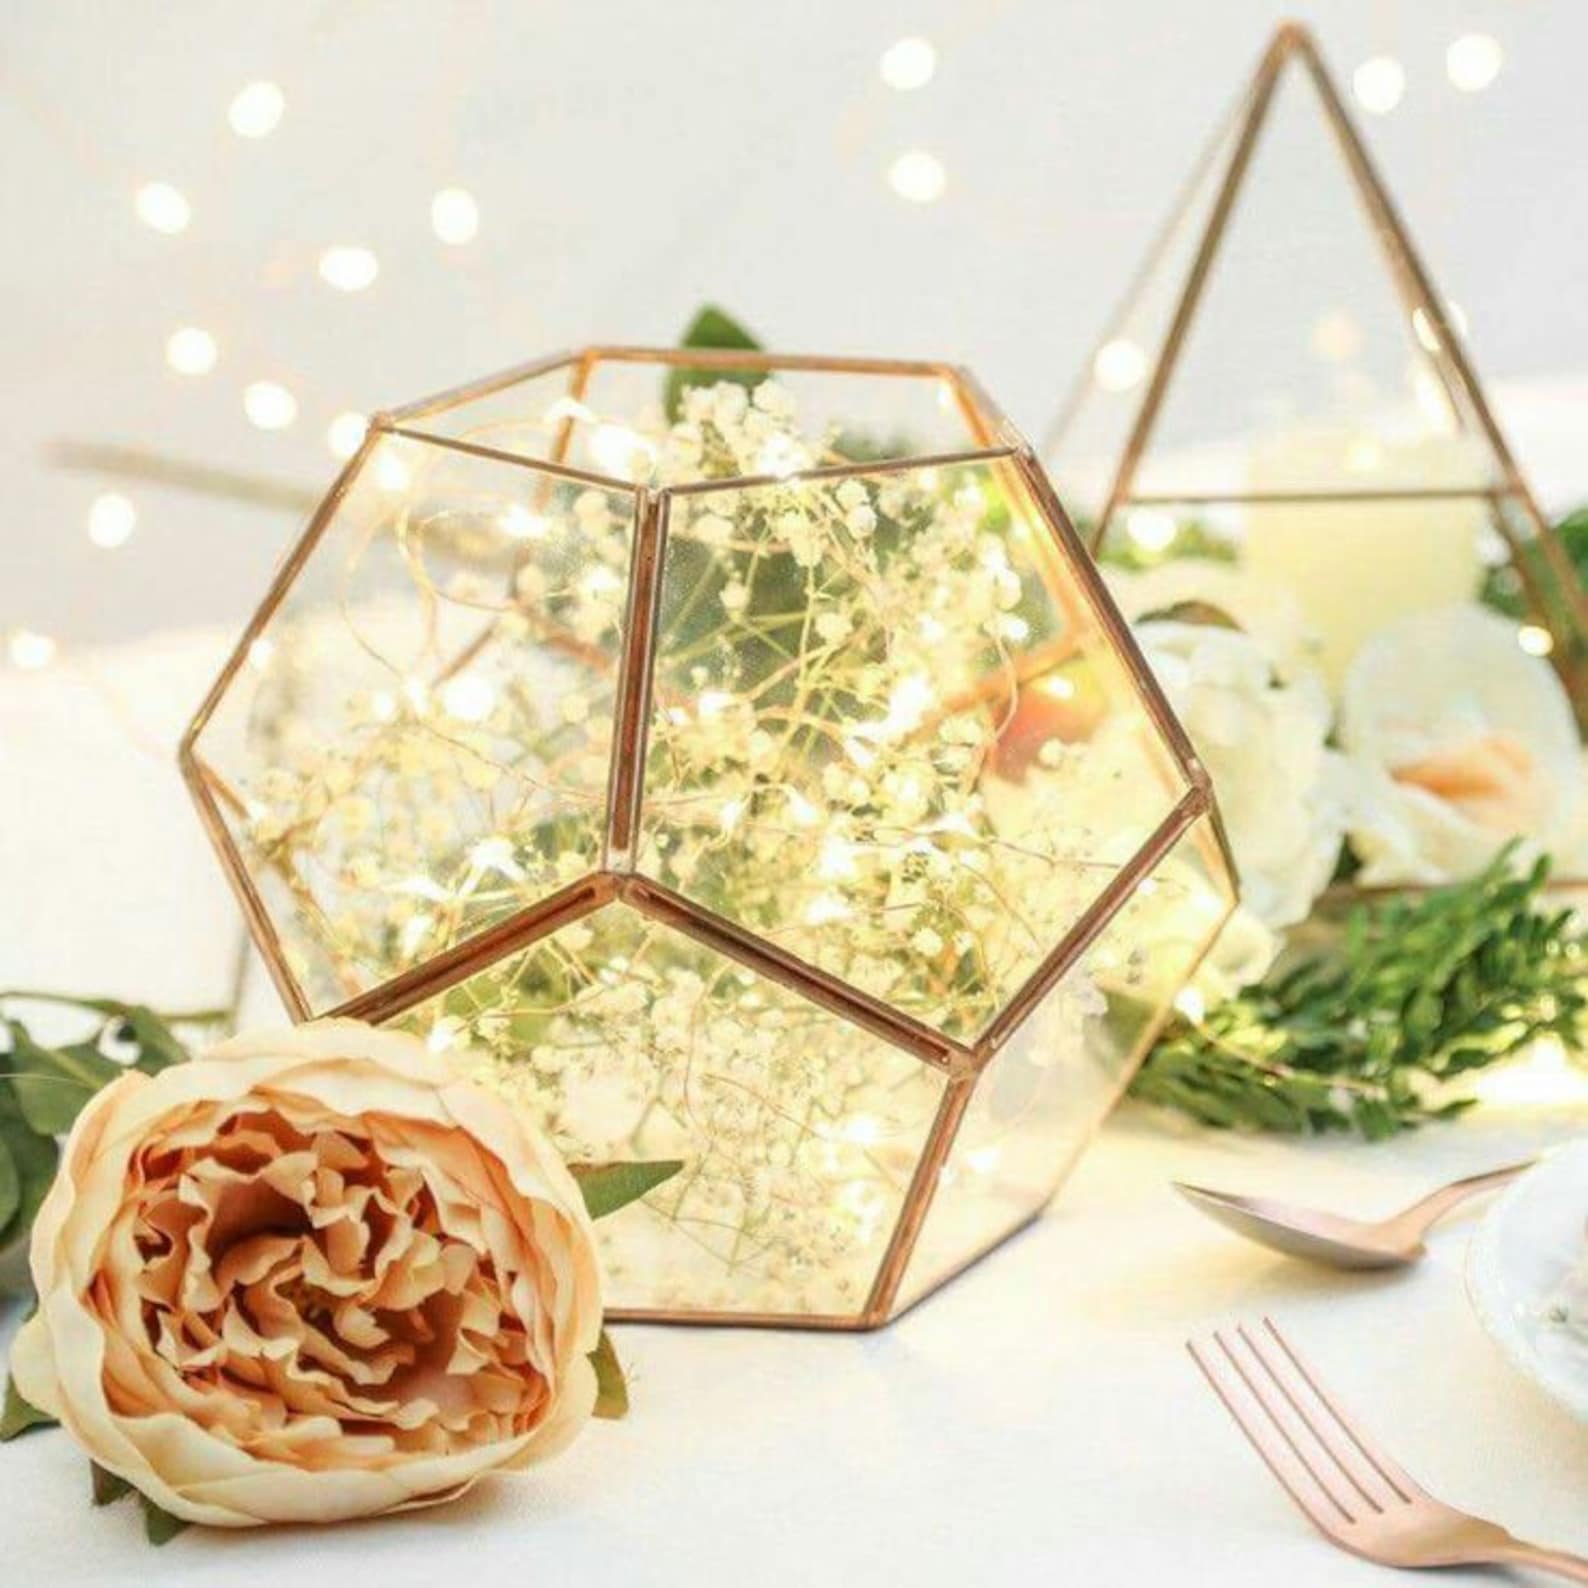 9 Non-Flower Centerpiece Ideas for Your Table - Adorn the Table